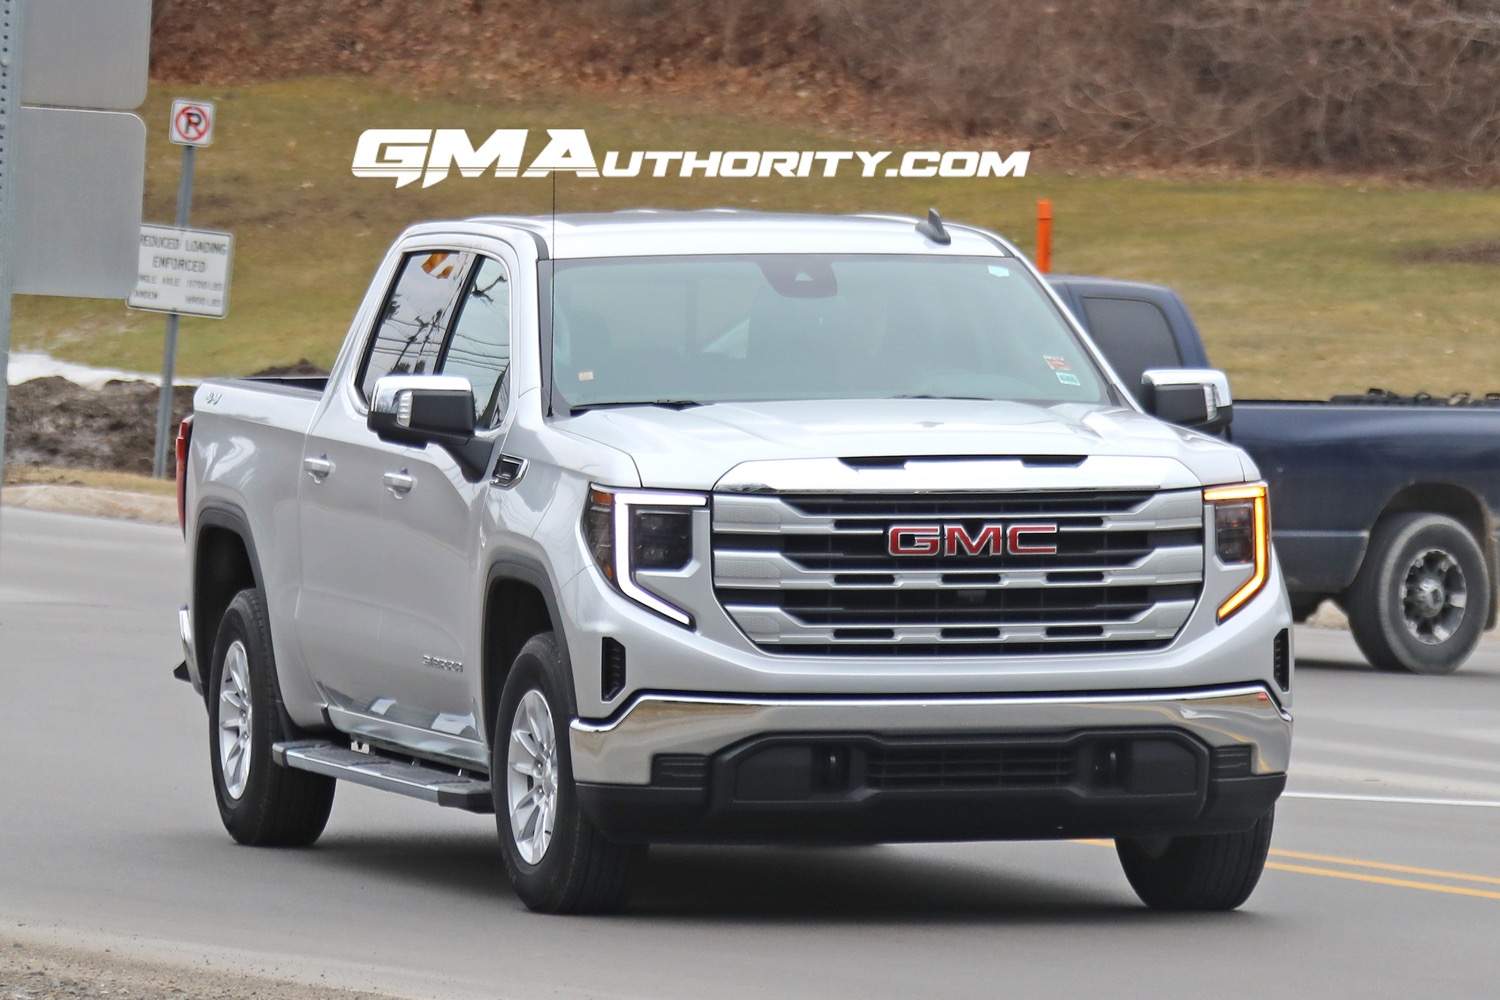 Refreshed 2022 GMC Sierra SLE: First Real-World Photos